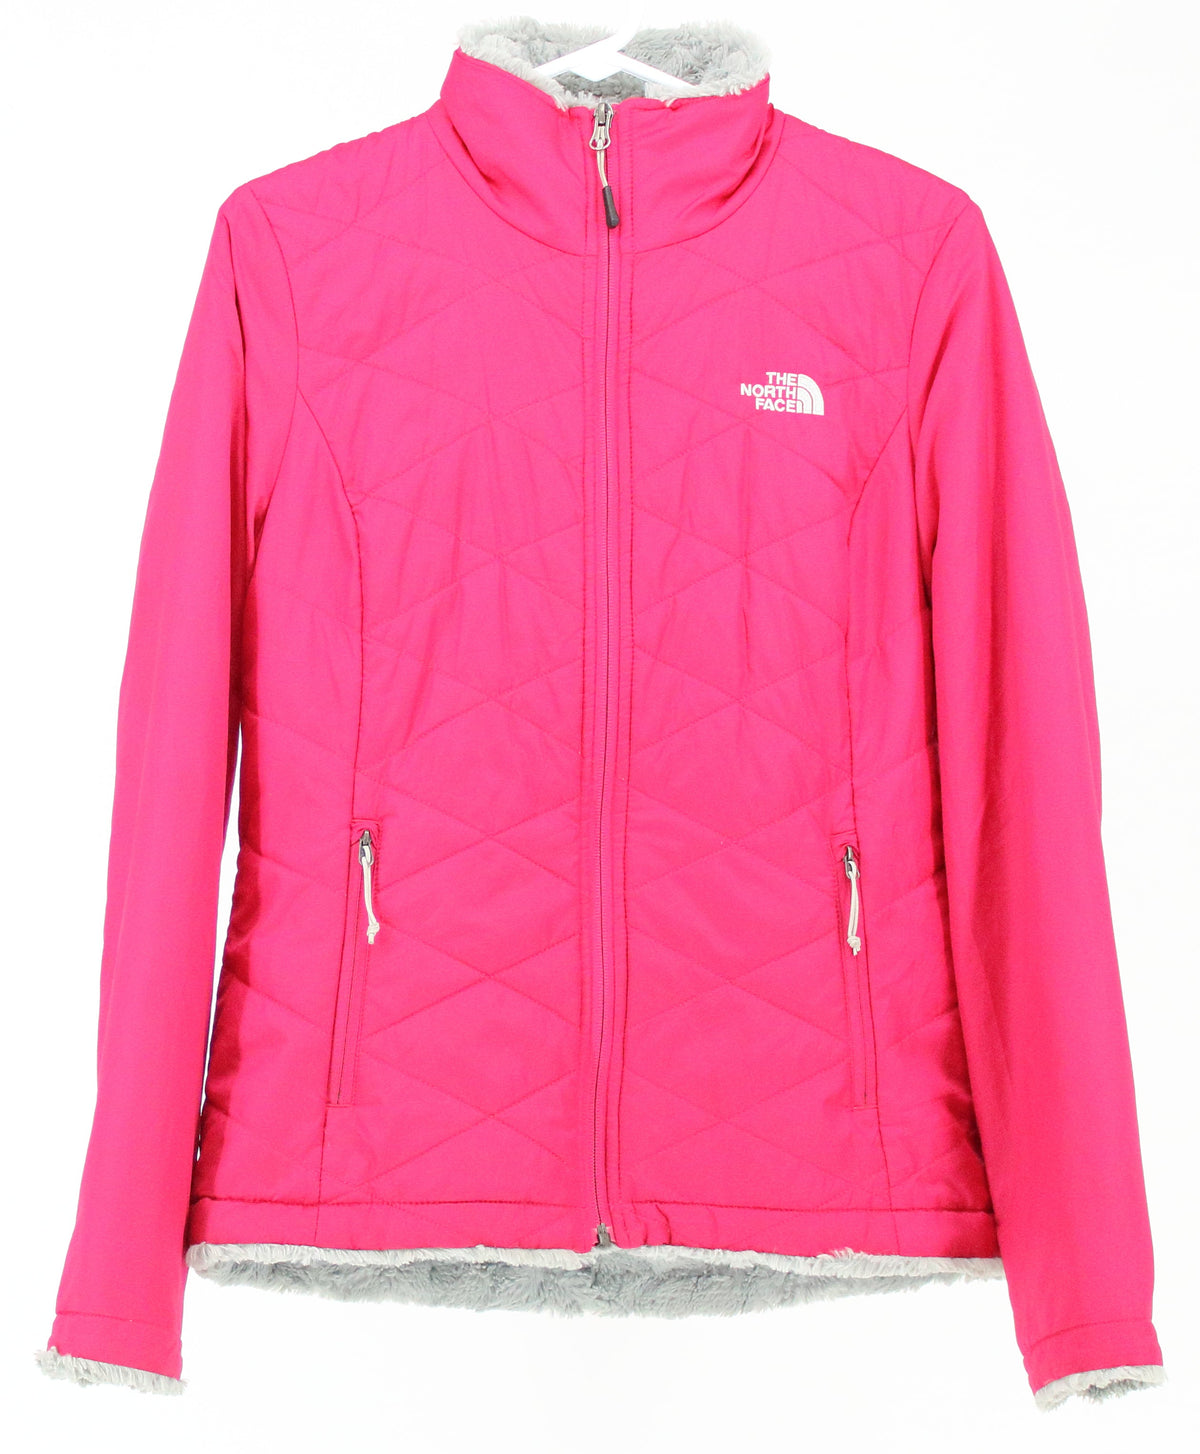 The North Face Bright Pink Women's Zip Up Teddy Lined Jacket